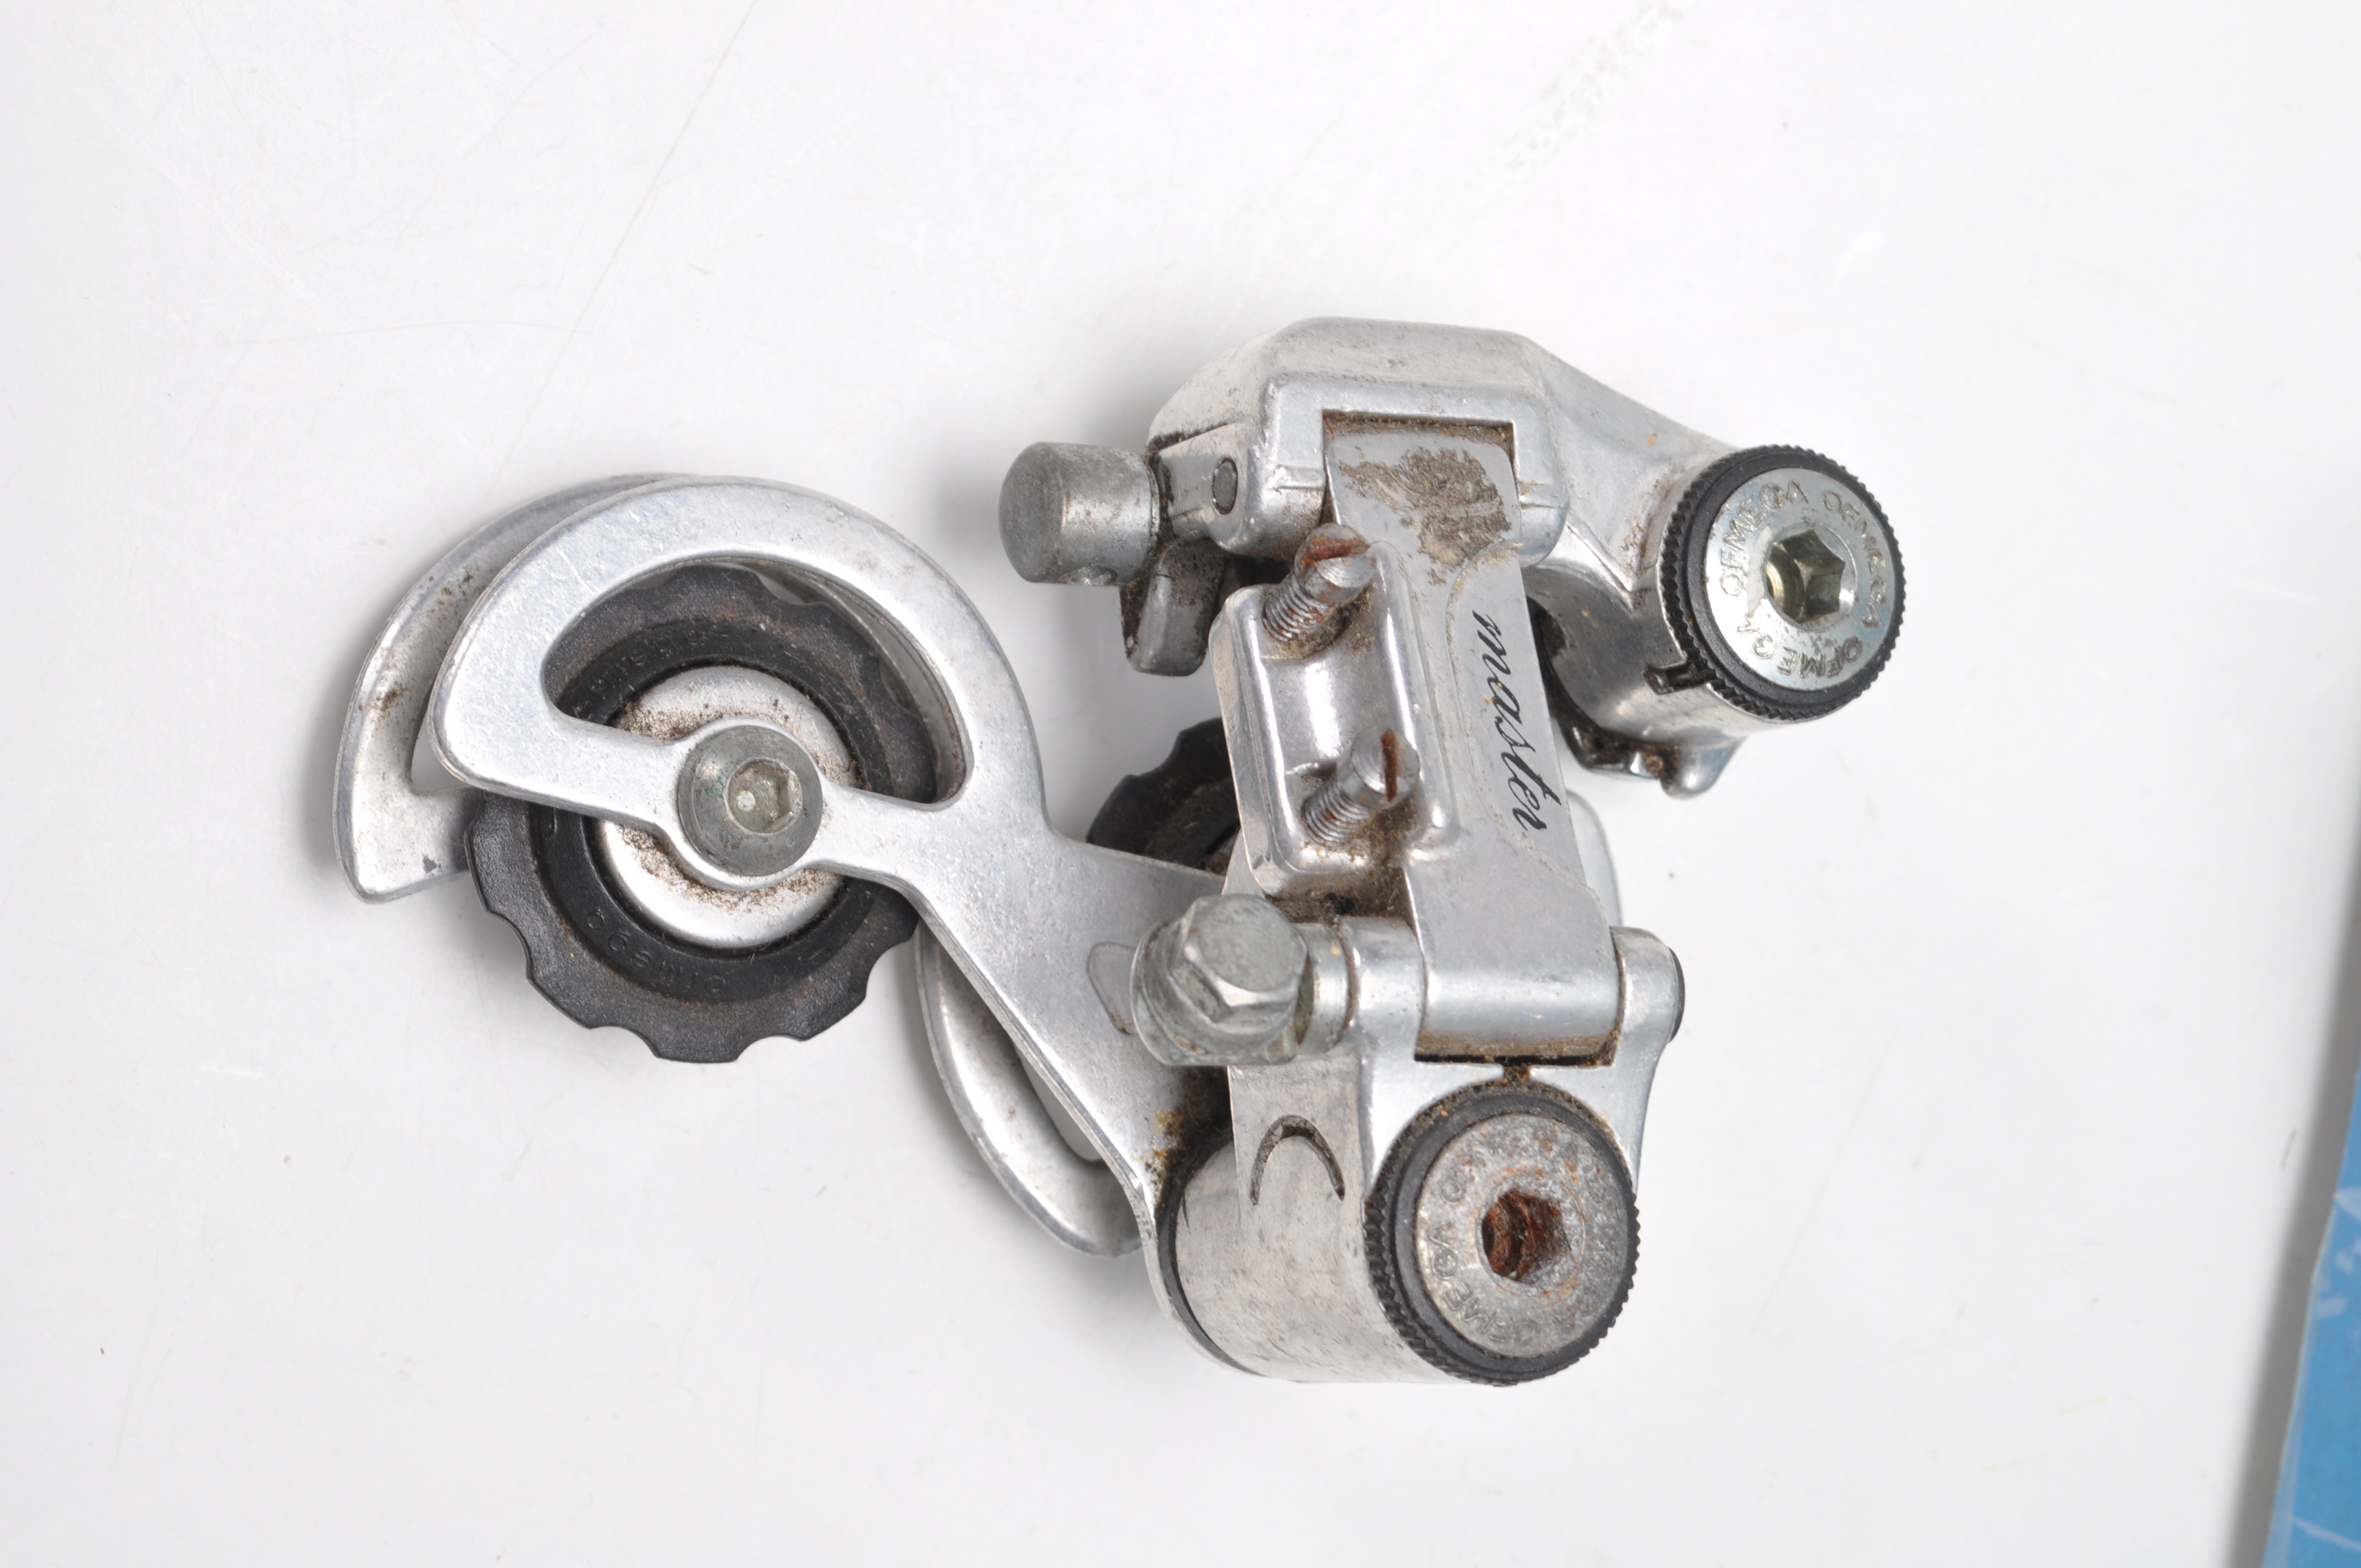 VINTAGE BICYCLES AND SPARES - COLLECTION OF THREADED BIKE HEADSET COMPONENTS. - Image 13 of 20